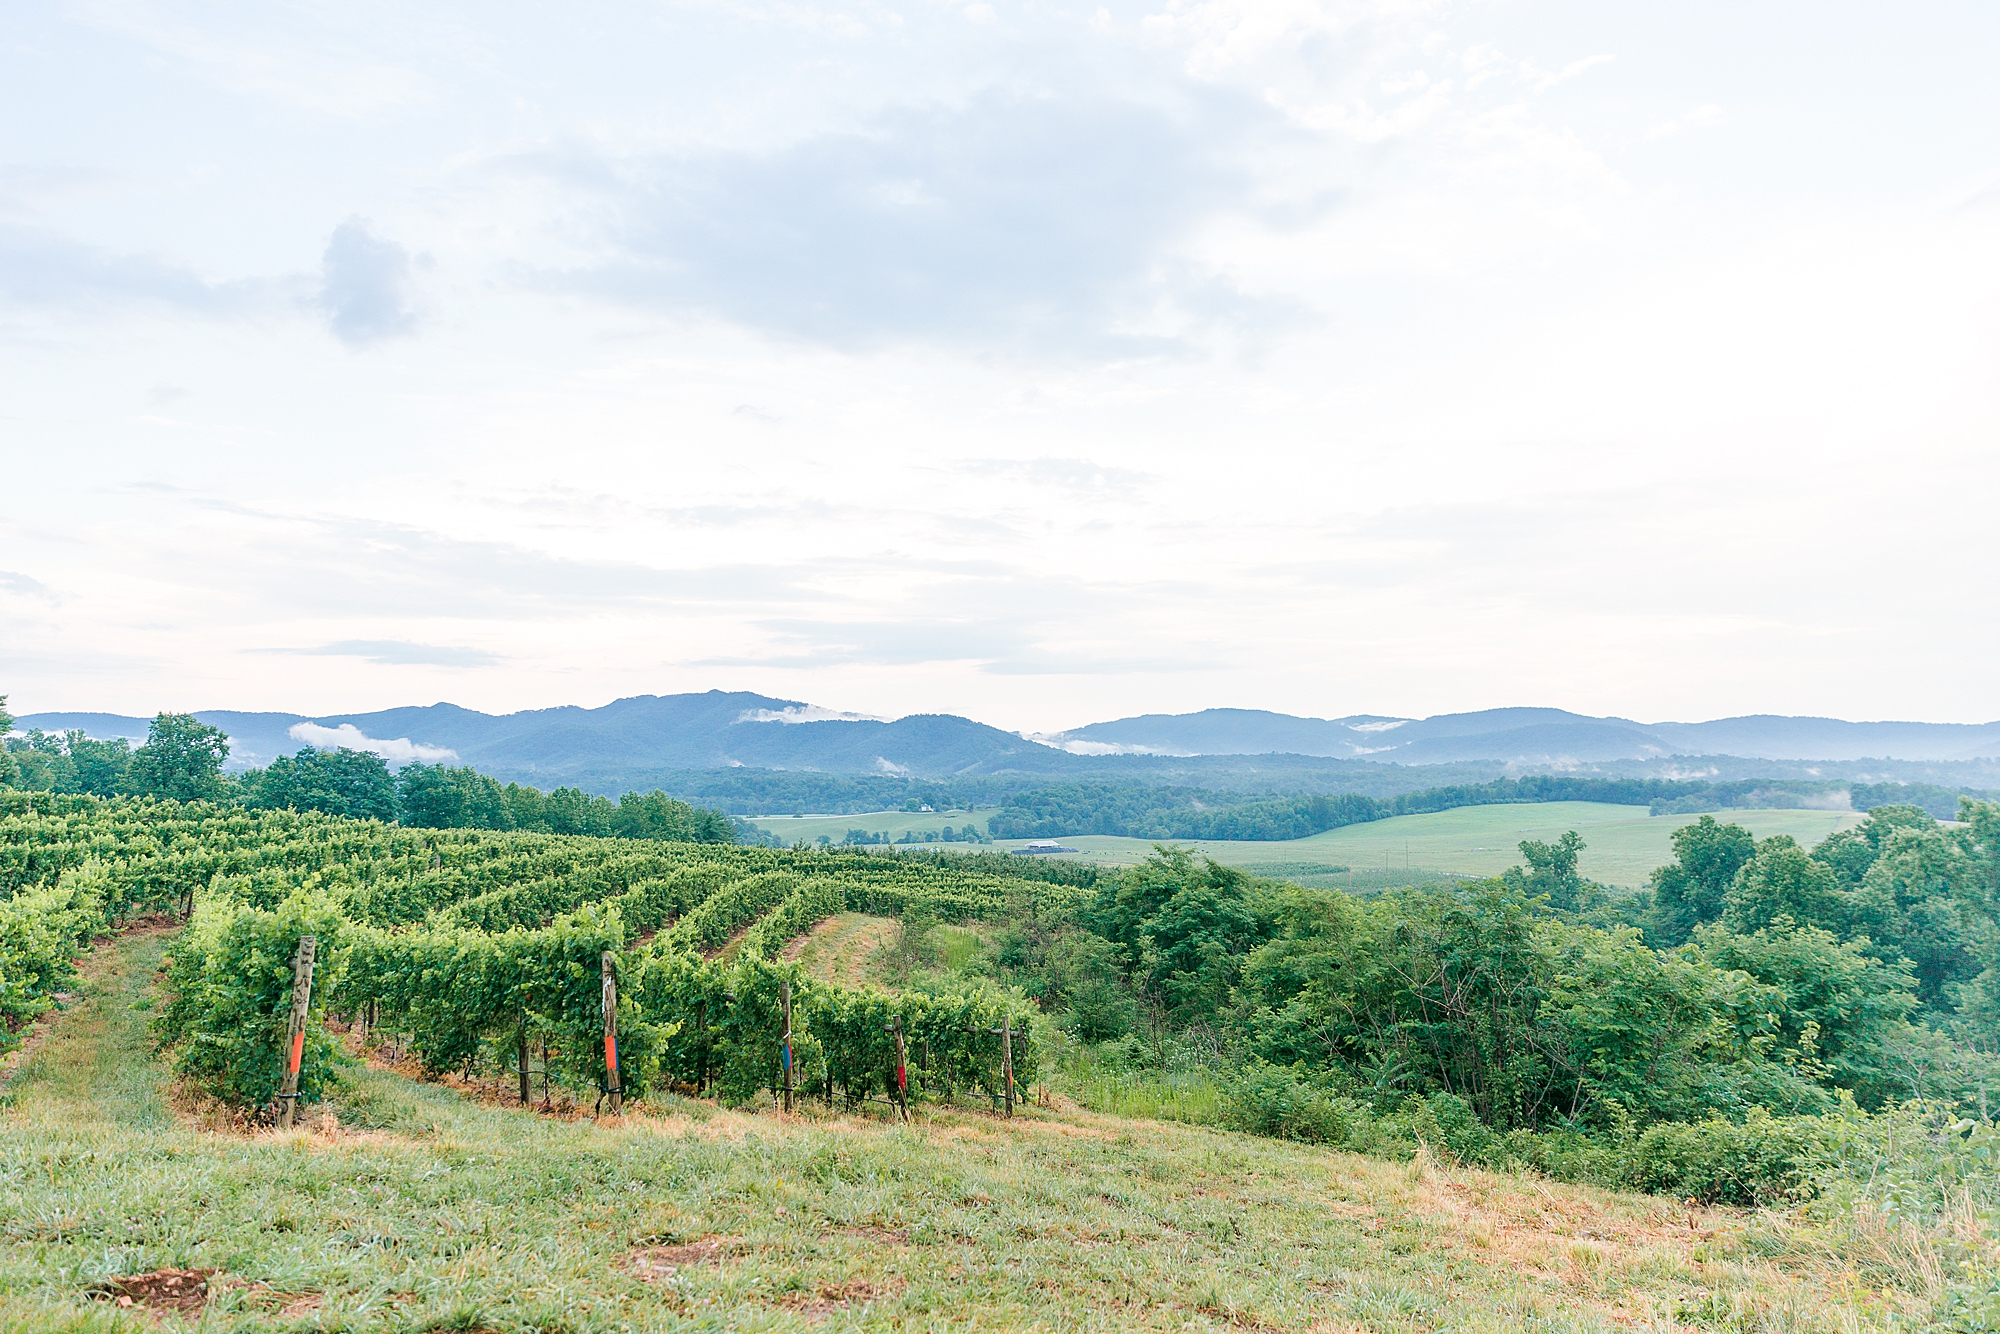 Wedding venue in Central Virginia with mountain views taken by Charlottesville wedding photographer Ashley Eagleson Photogaphy.